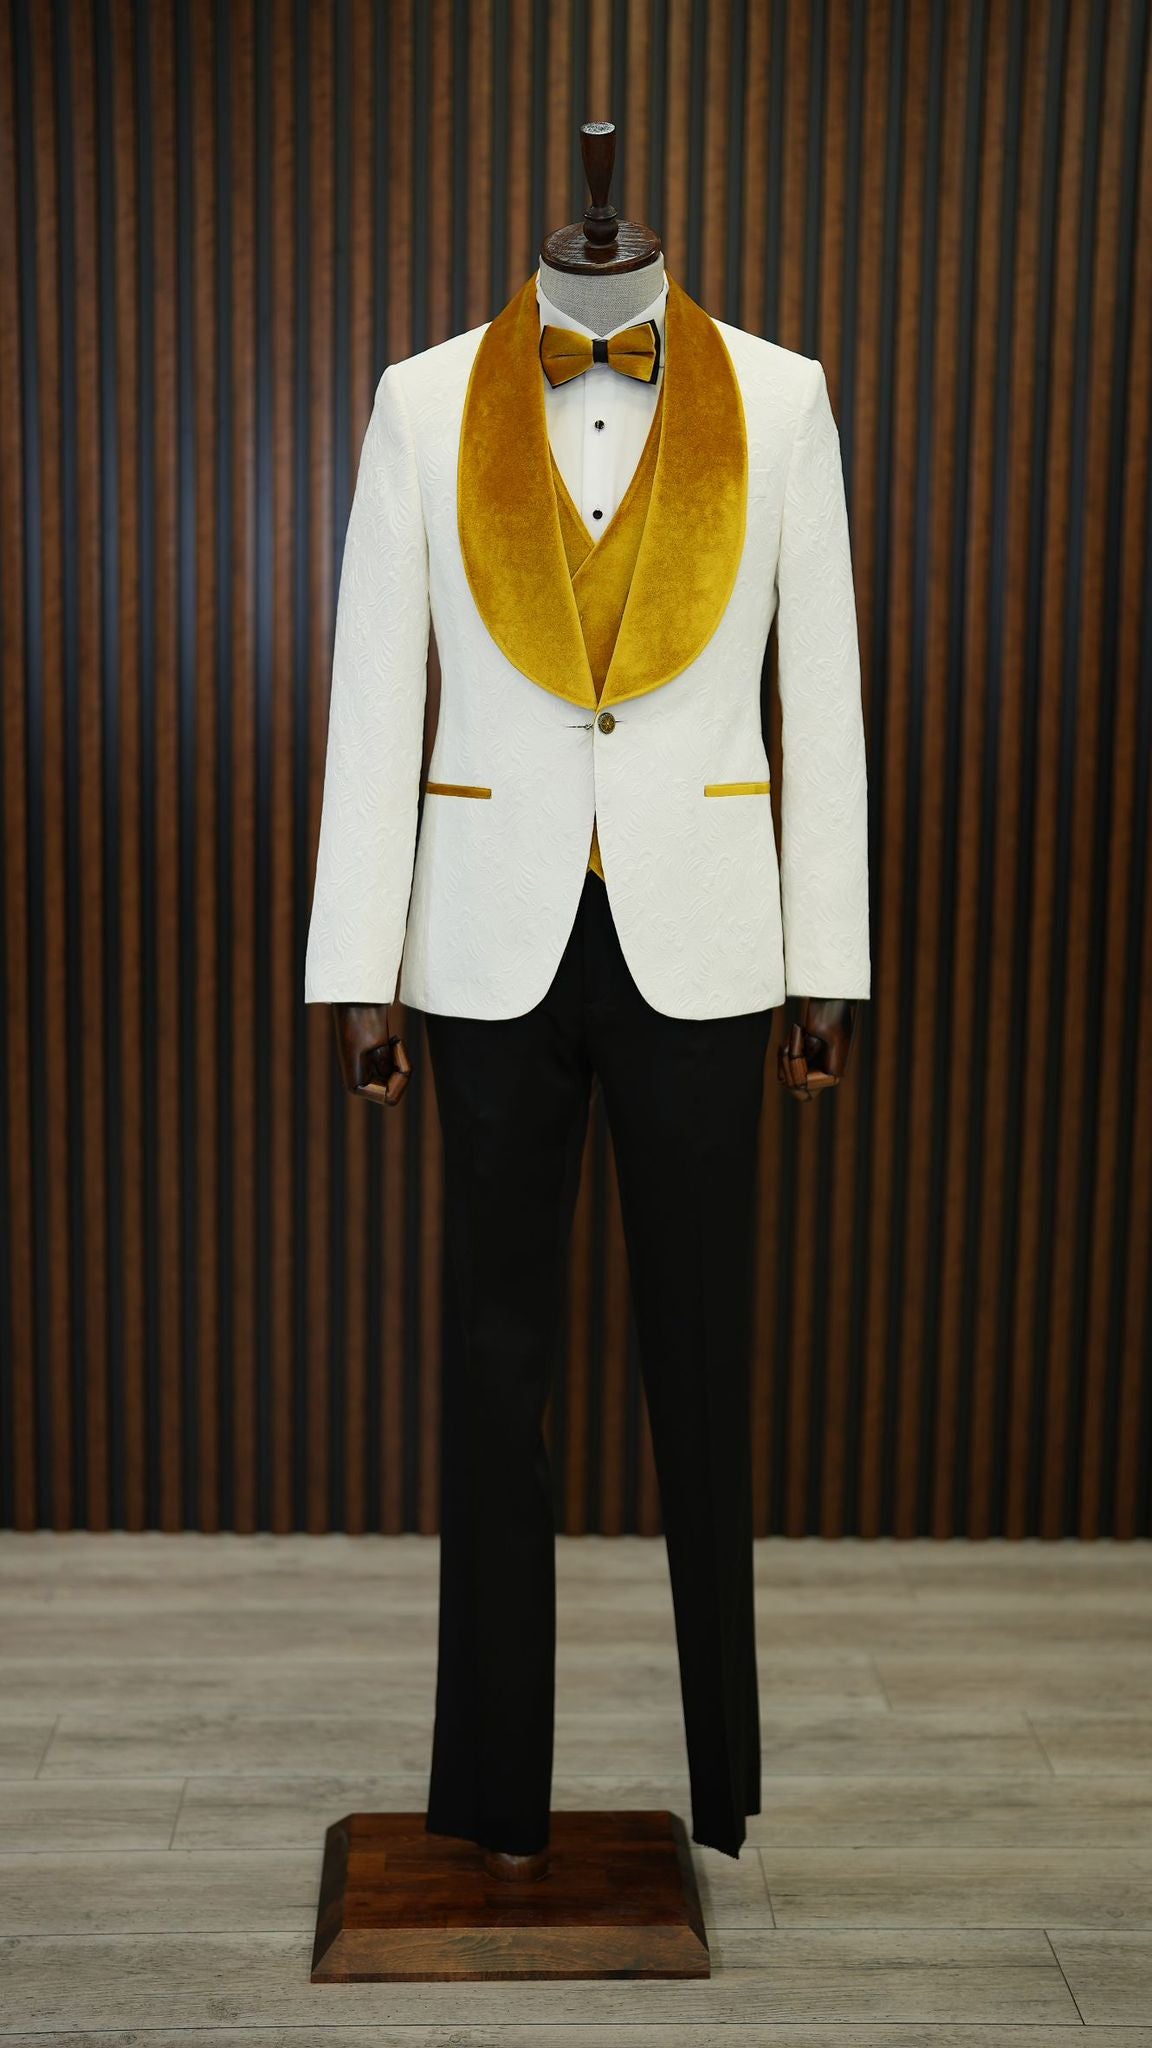 A Yellow and White Tuxedo Suit on display.